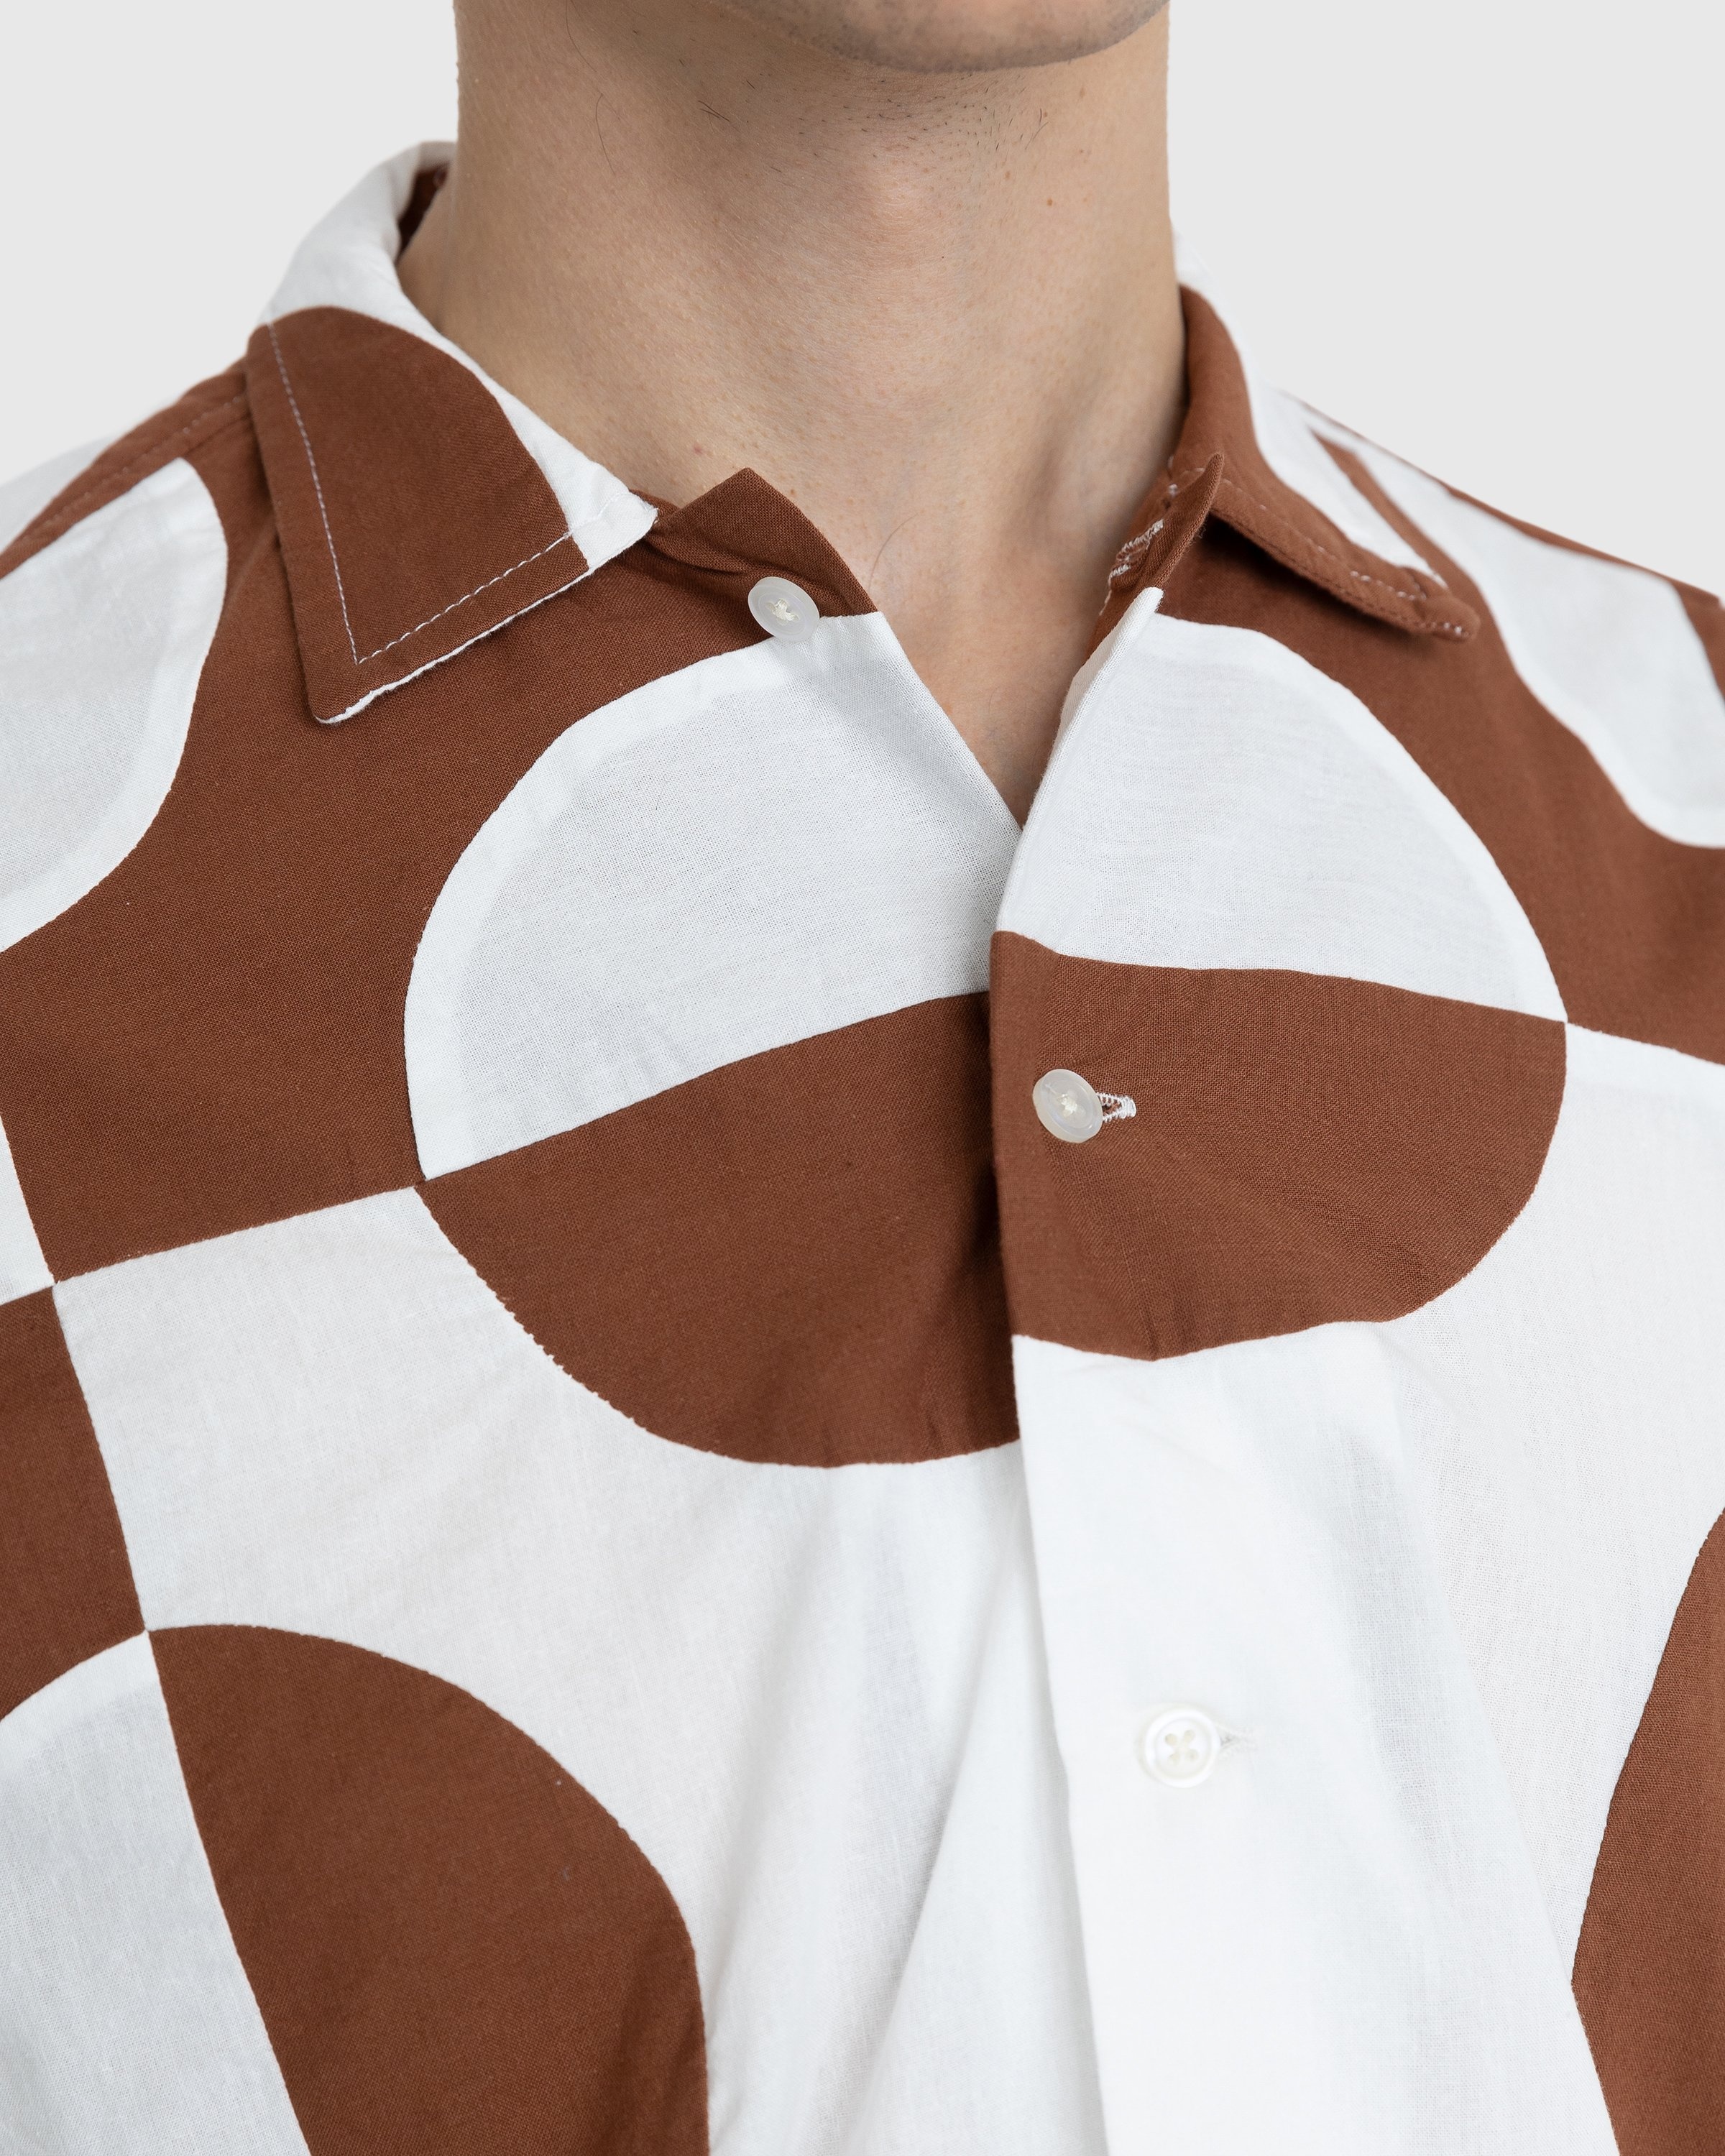 bode – Duo Oval Patchwork Long-Sleeve Shirt Brown - Shirts - Multi - Image 7